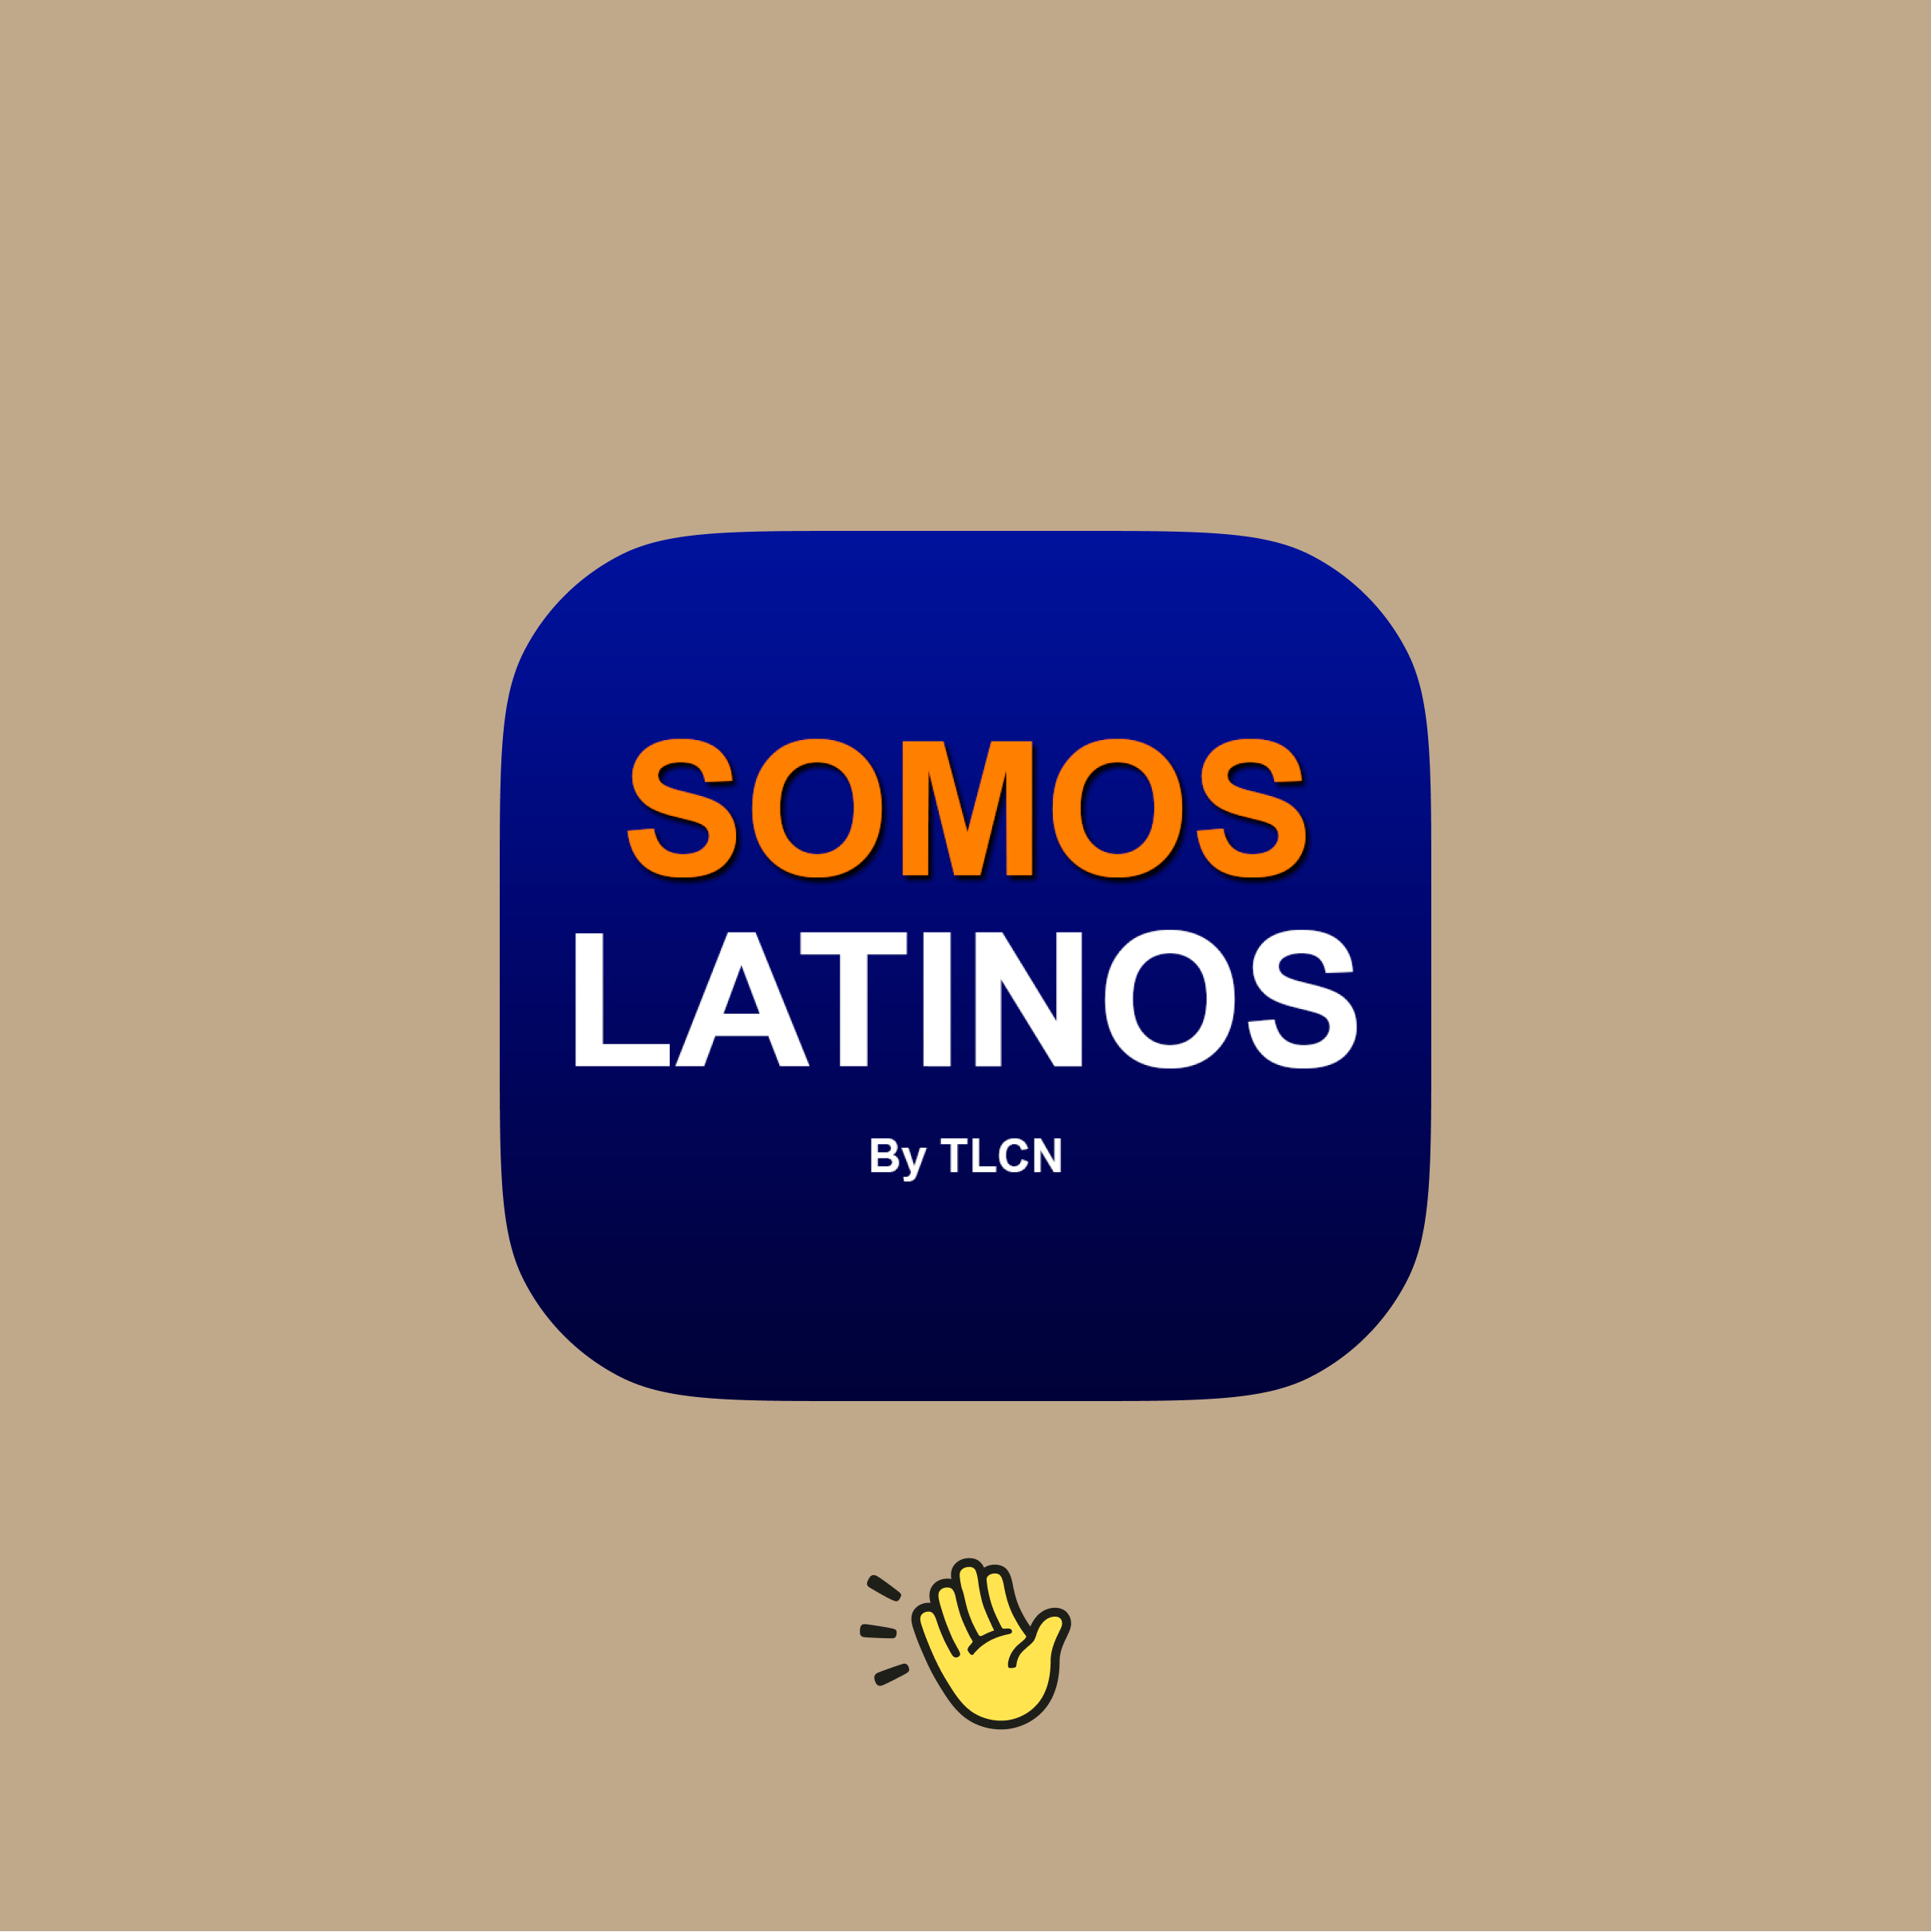 Somos Primos: Dedicated to Hispanic Heritage and Diversity Issues